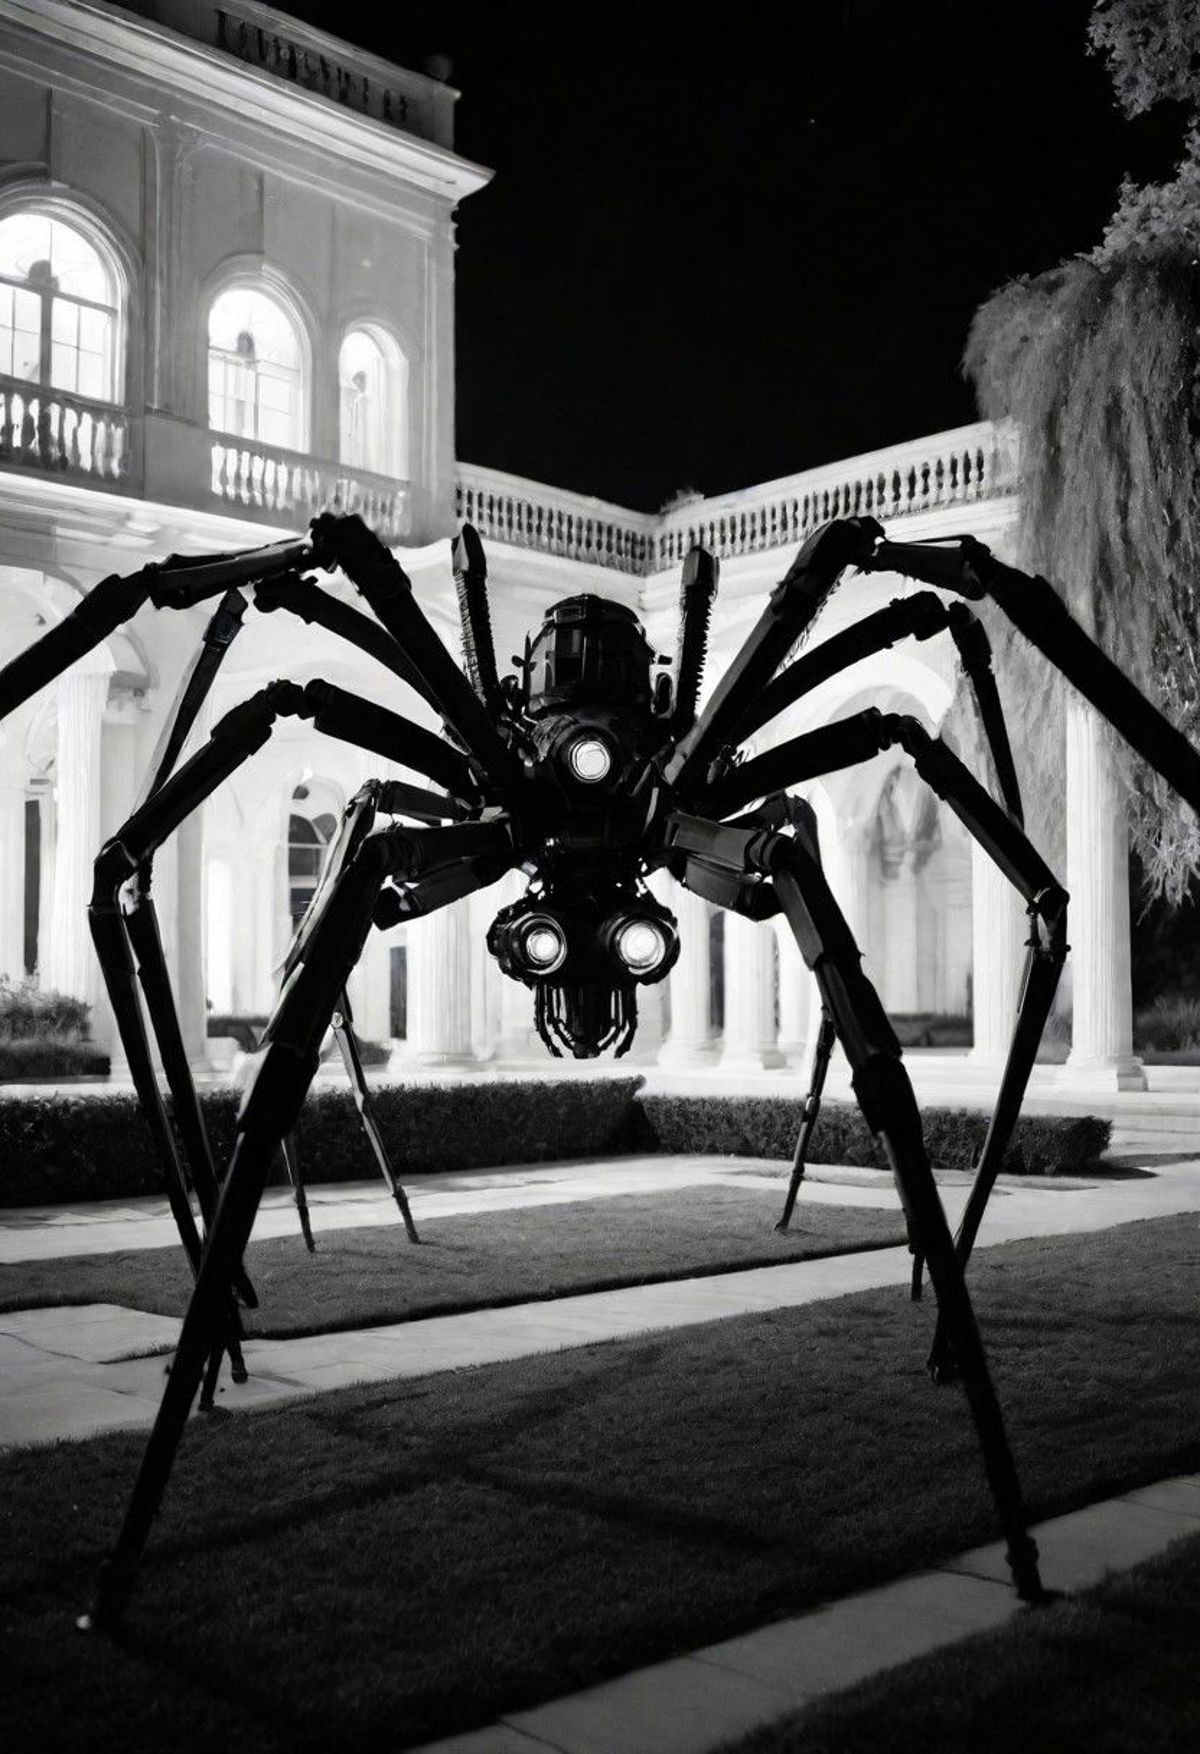 A large robot spider on a lawn in front of a building at night.